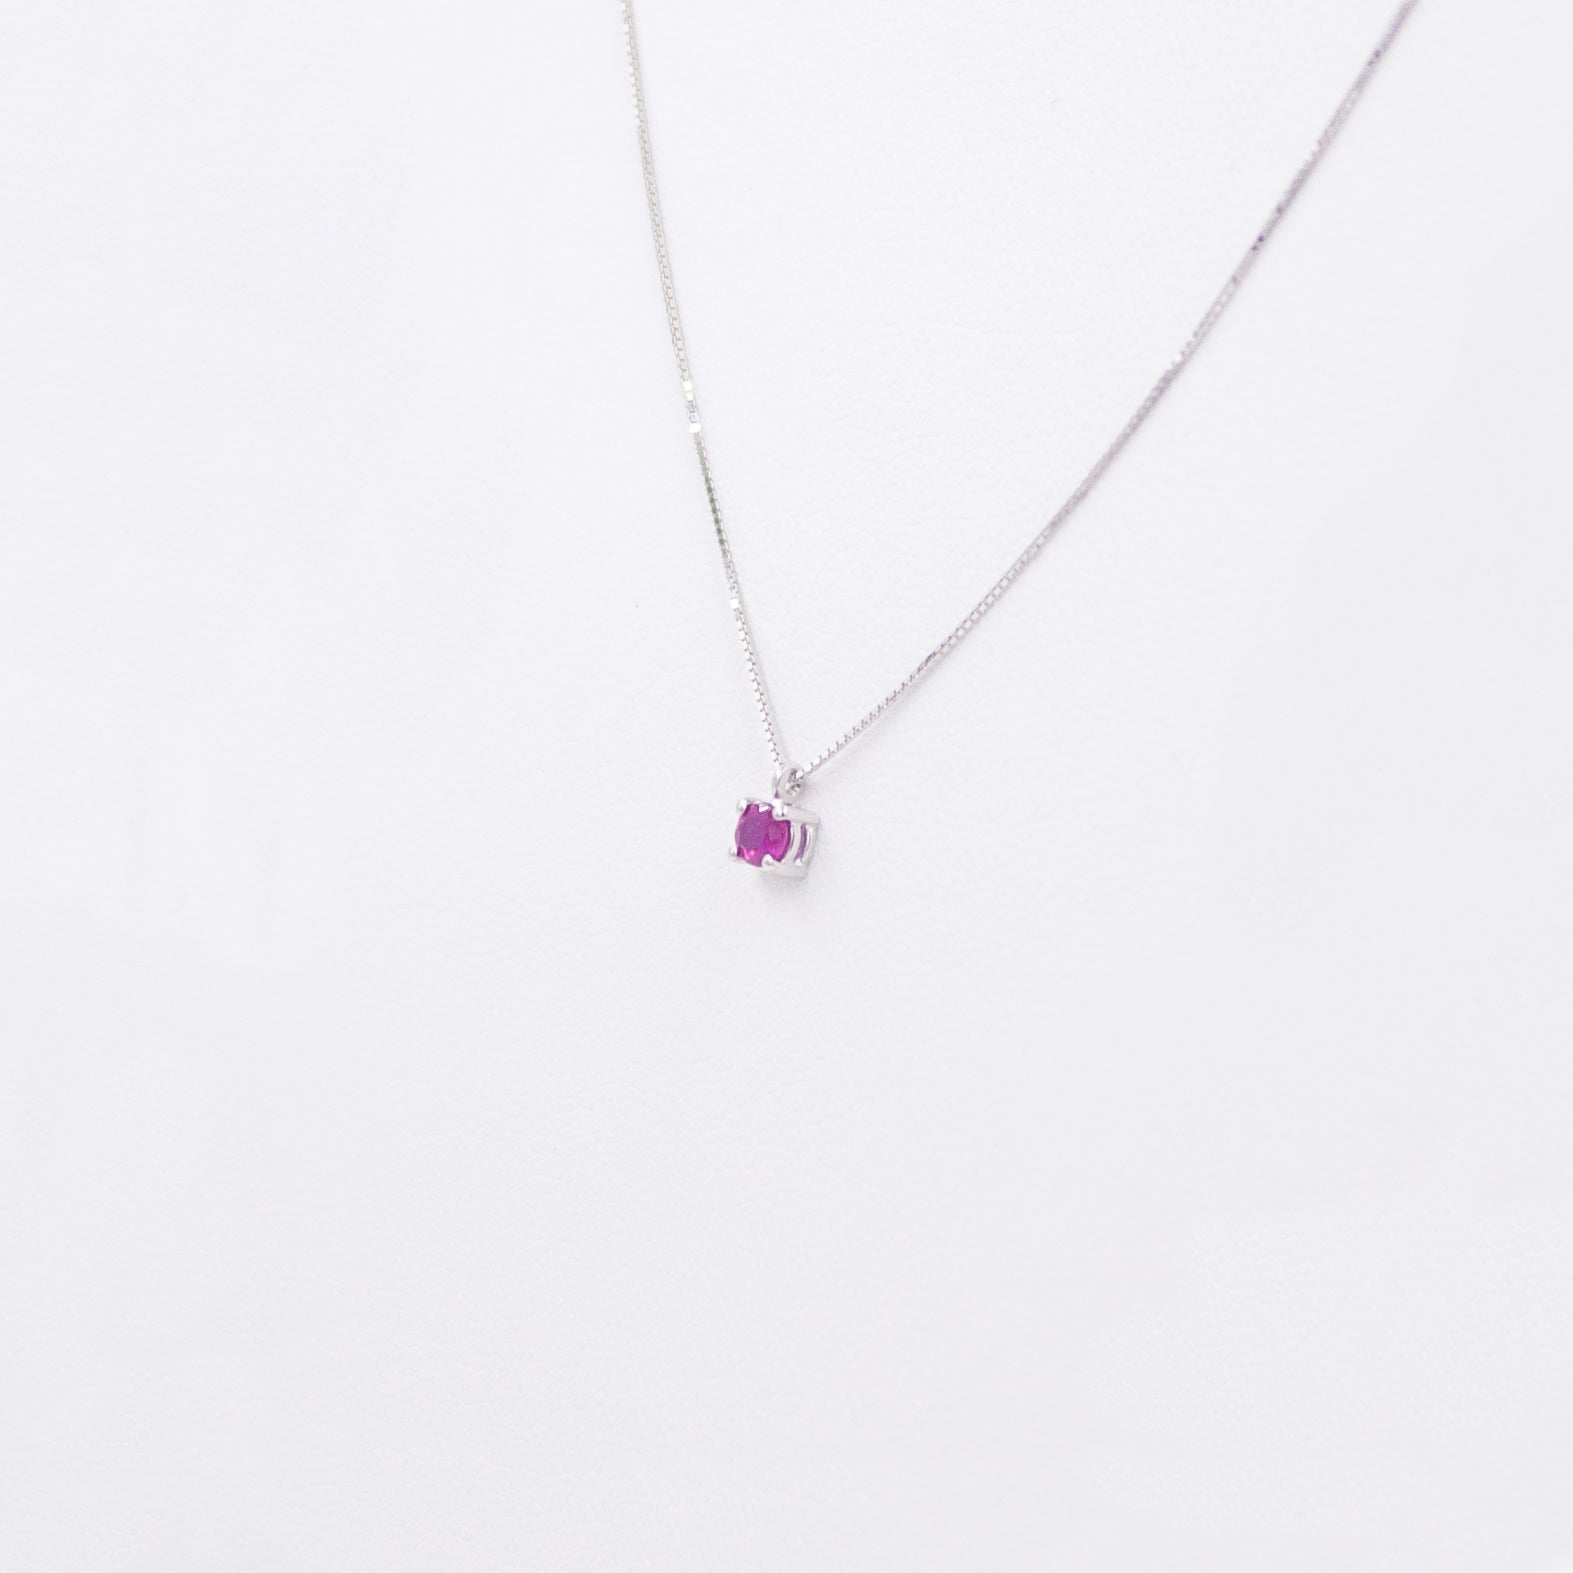 Spotlight Necklace with Ruby